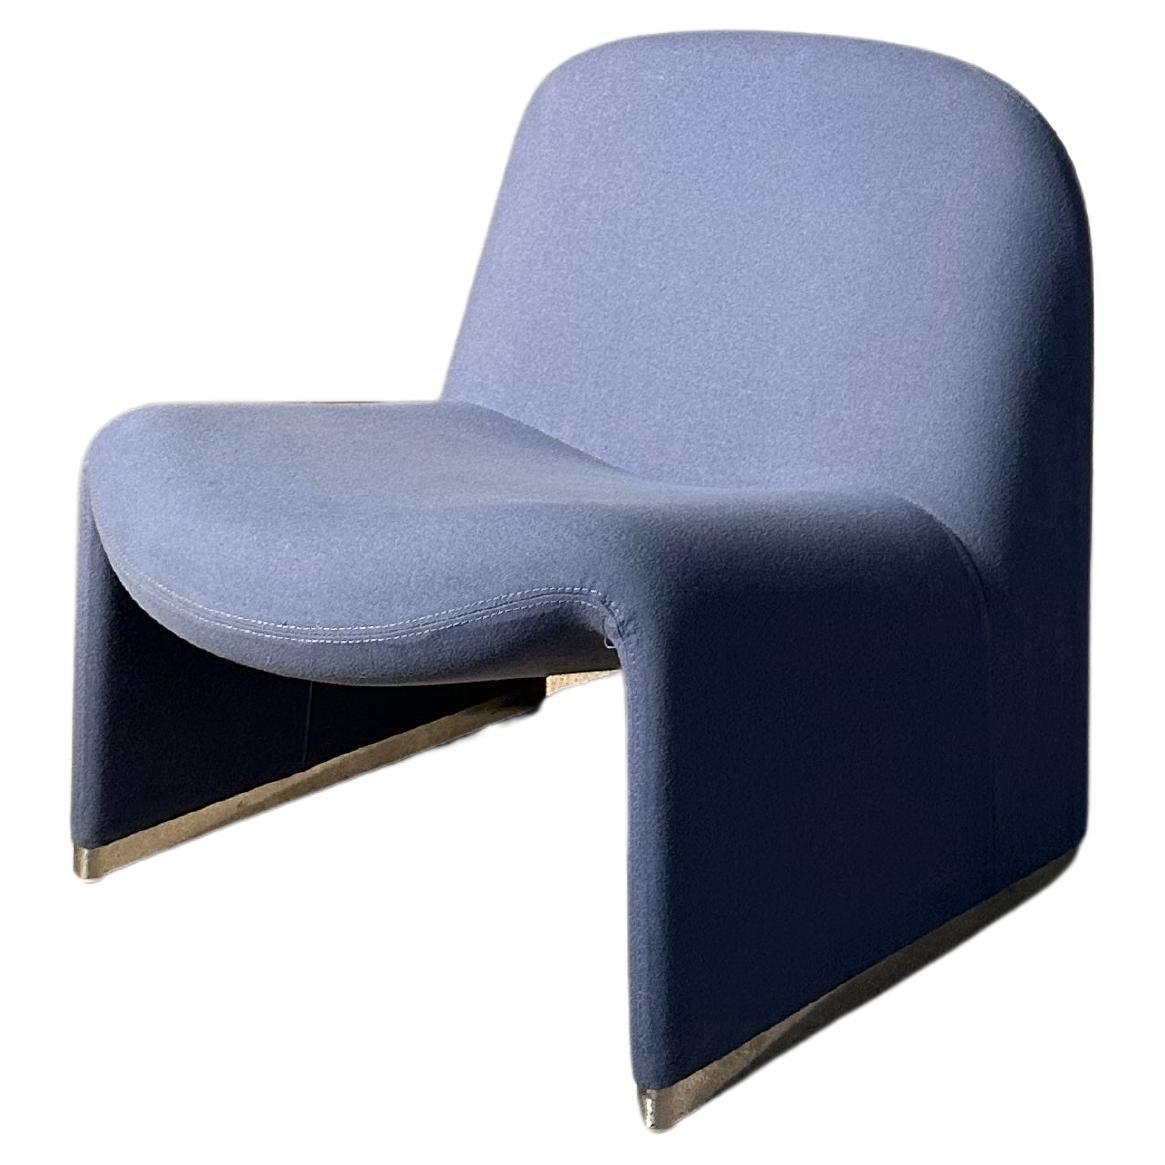 Alky chair by Giancarlo Piretti for Artifort